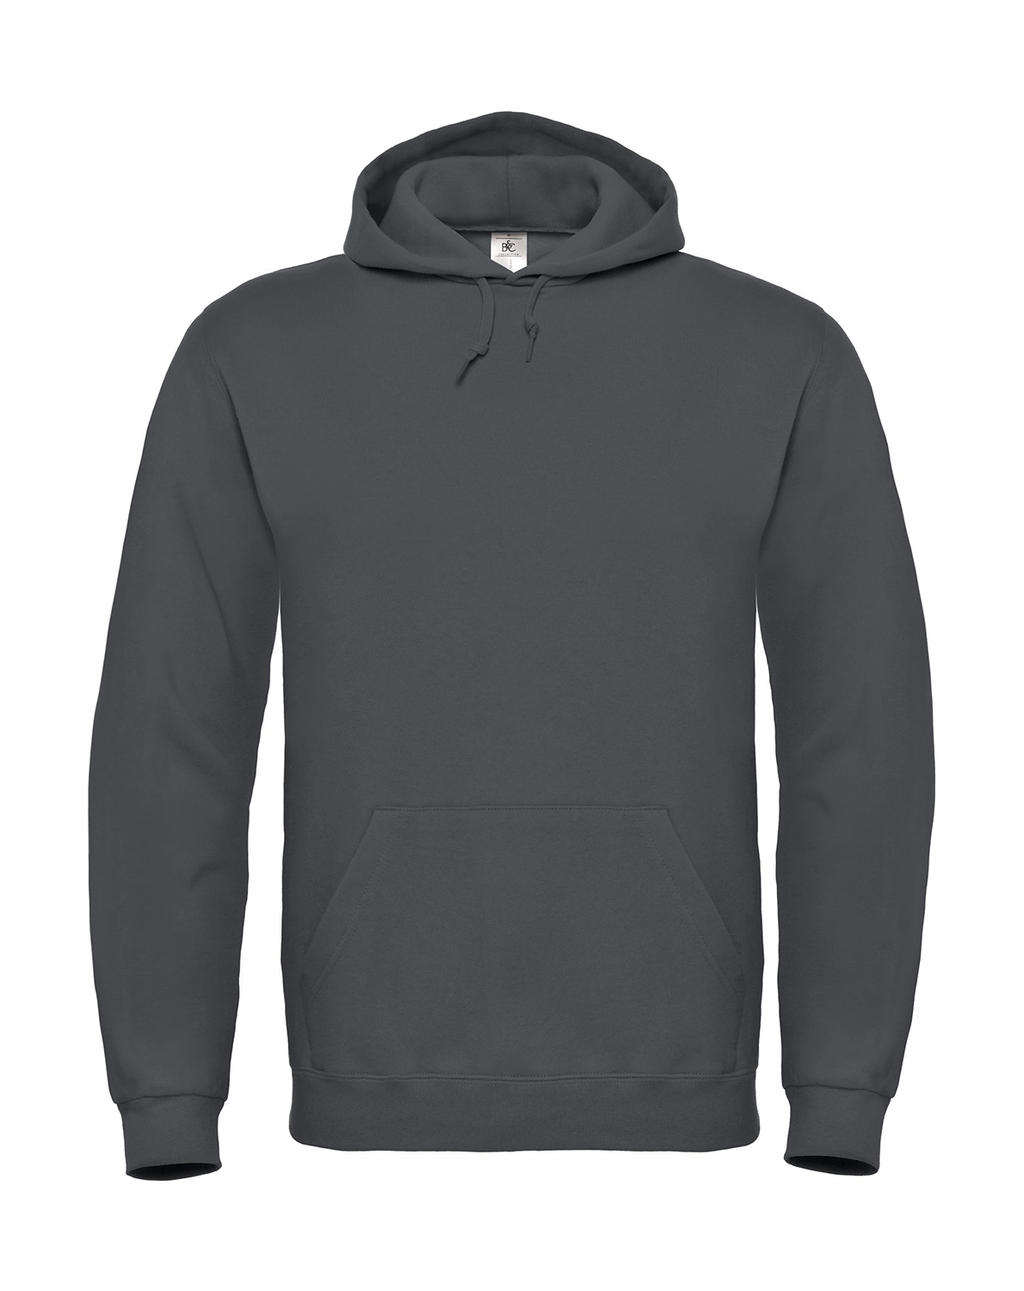  ID.003 Cotton Rich Hooded Sweatshirt in Farbe Anthracite